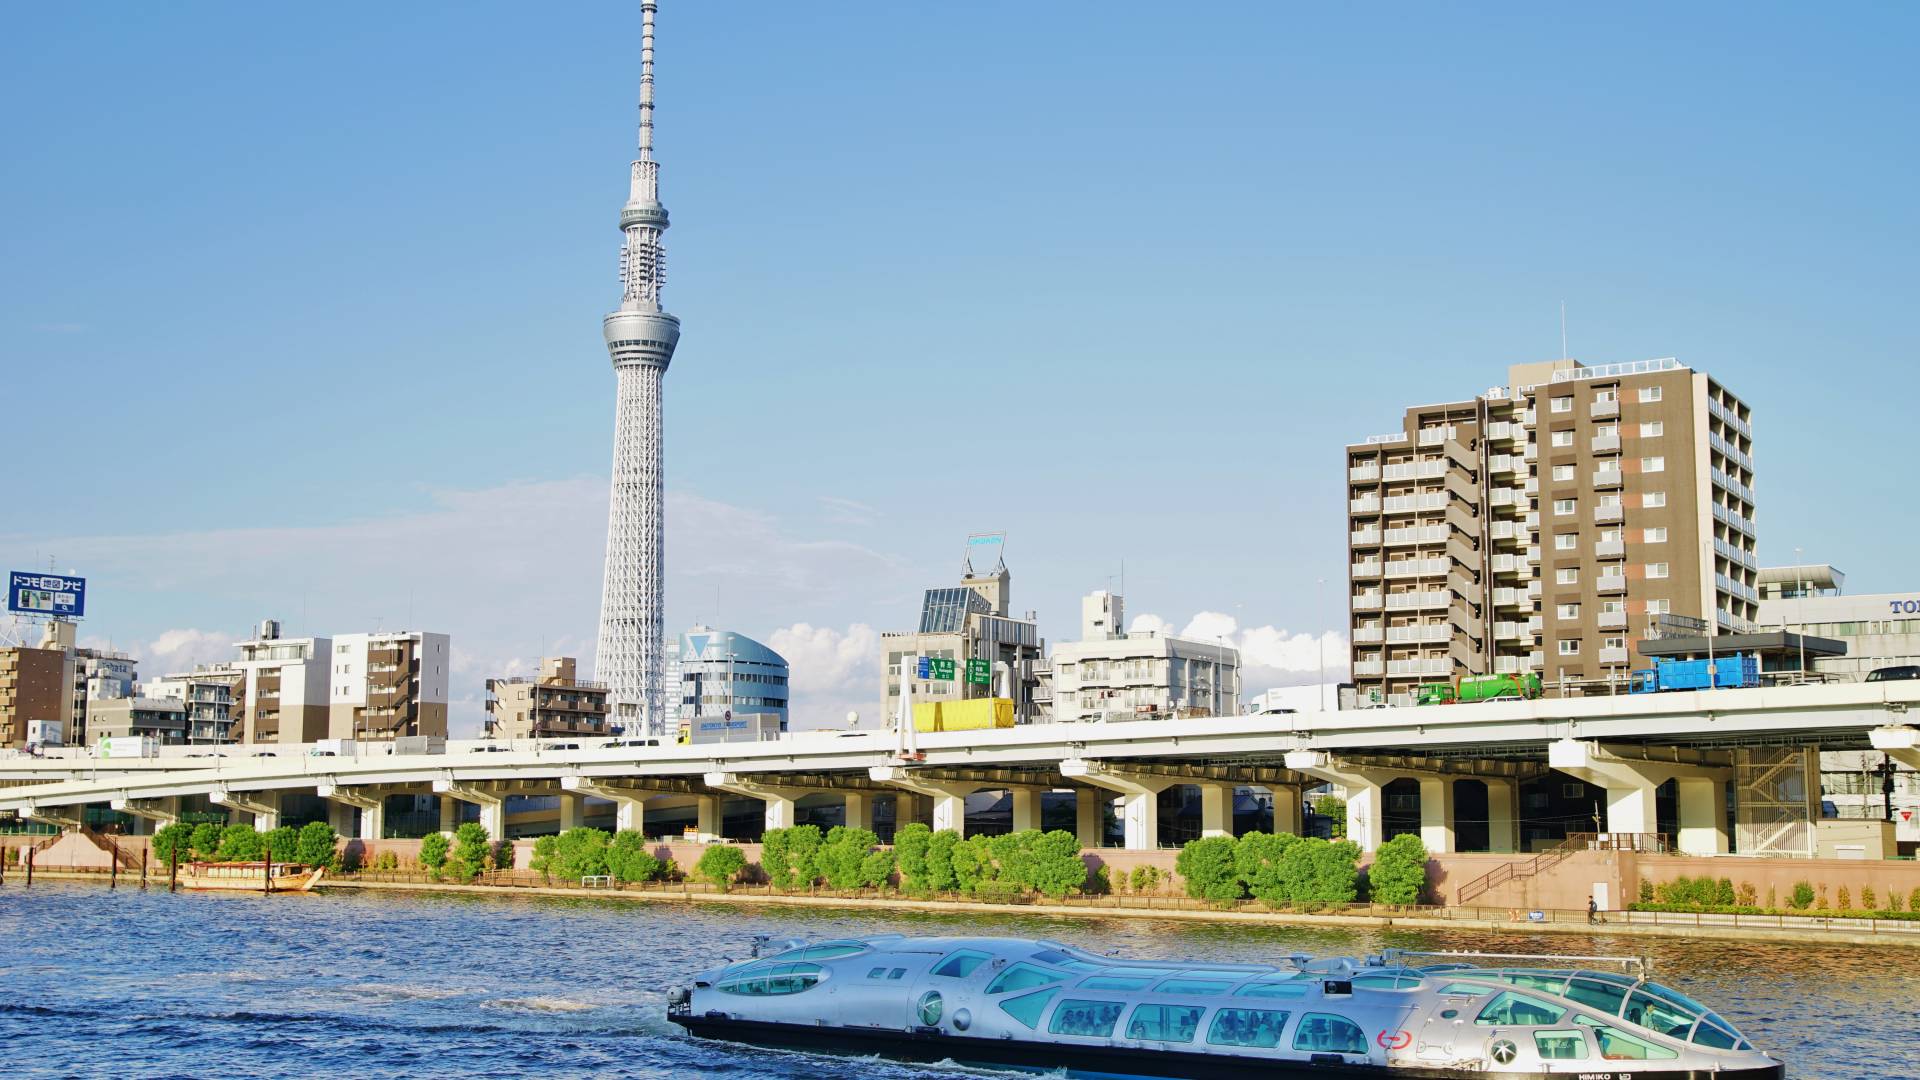 Strolling from Asakusa to Tokyo Skytree